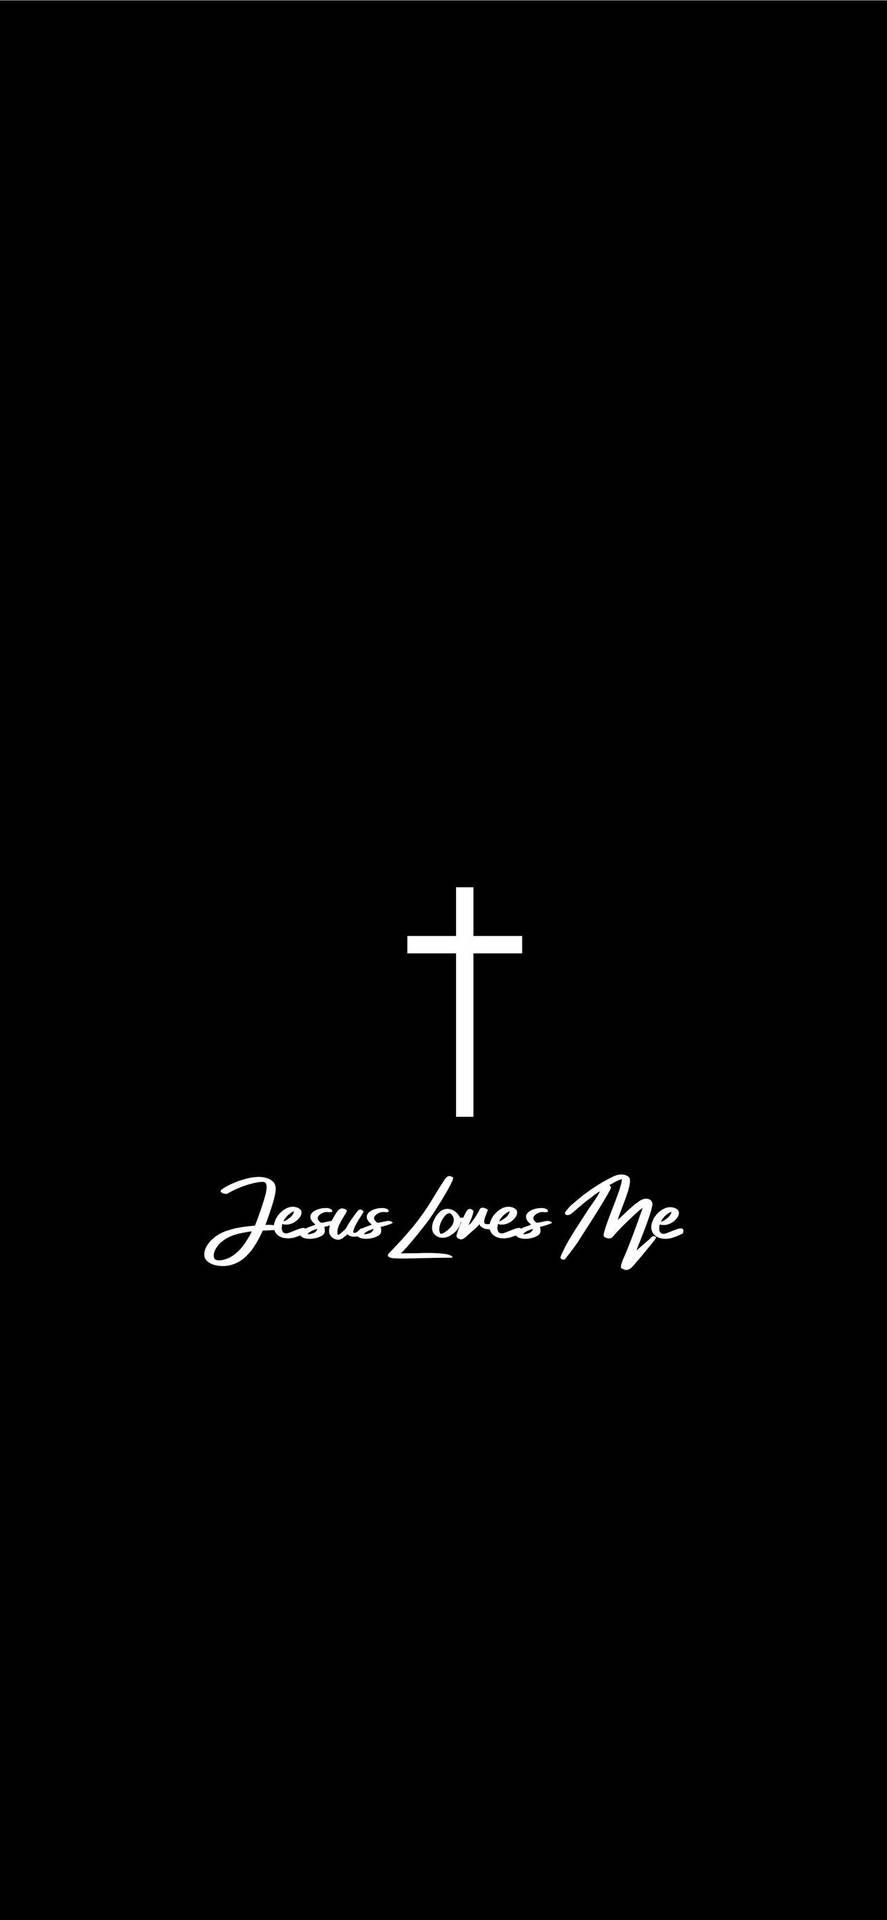 Black background with white cross and text that says 